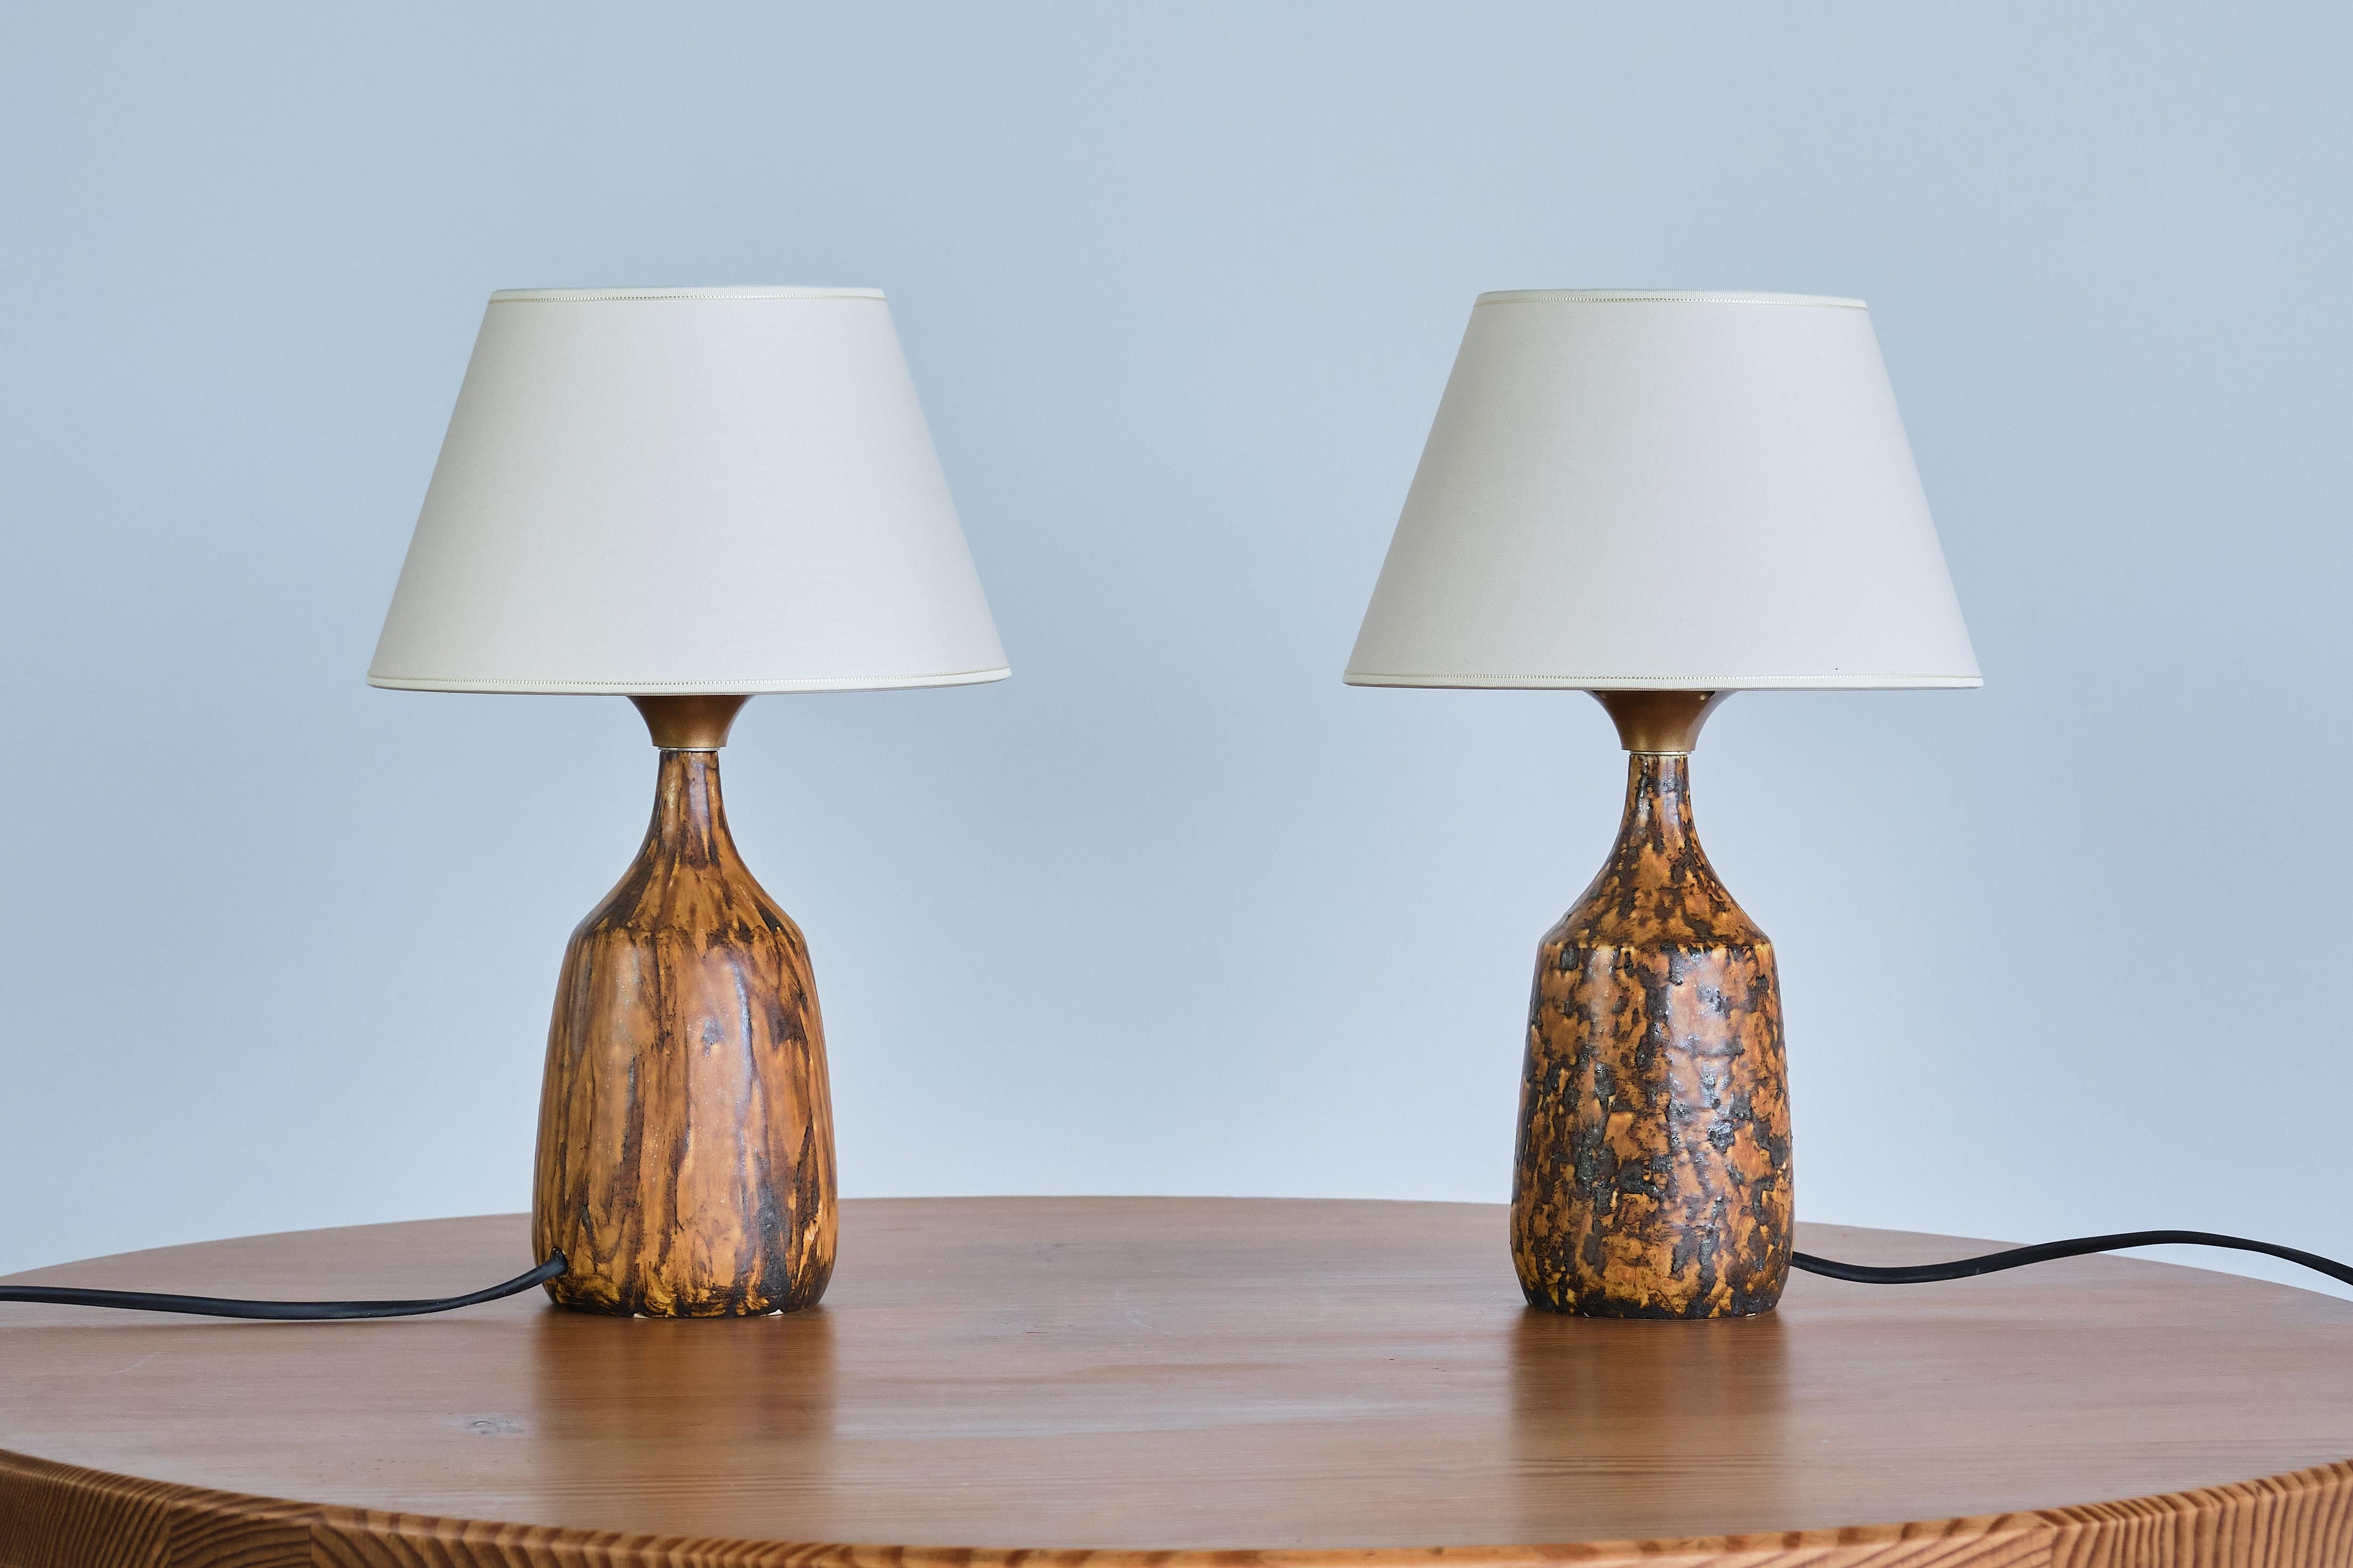 Pair of Gunnar Borg Glazed Stoneware Table Lamps, Höganäs, Sweden, 1960s For Sale 6